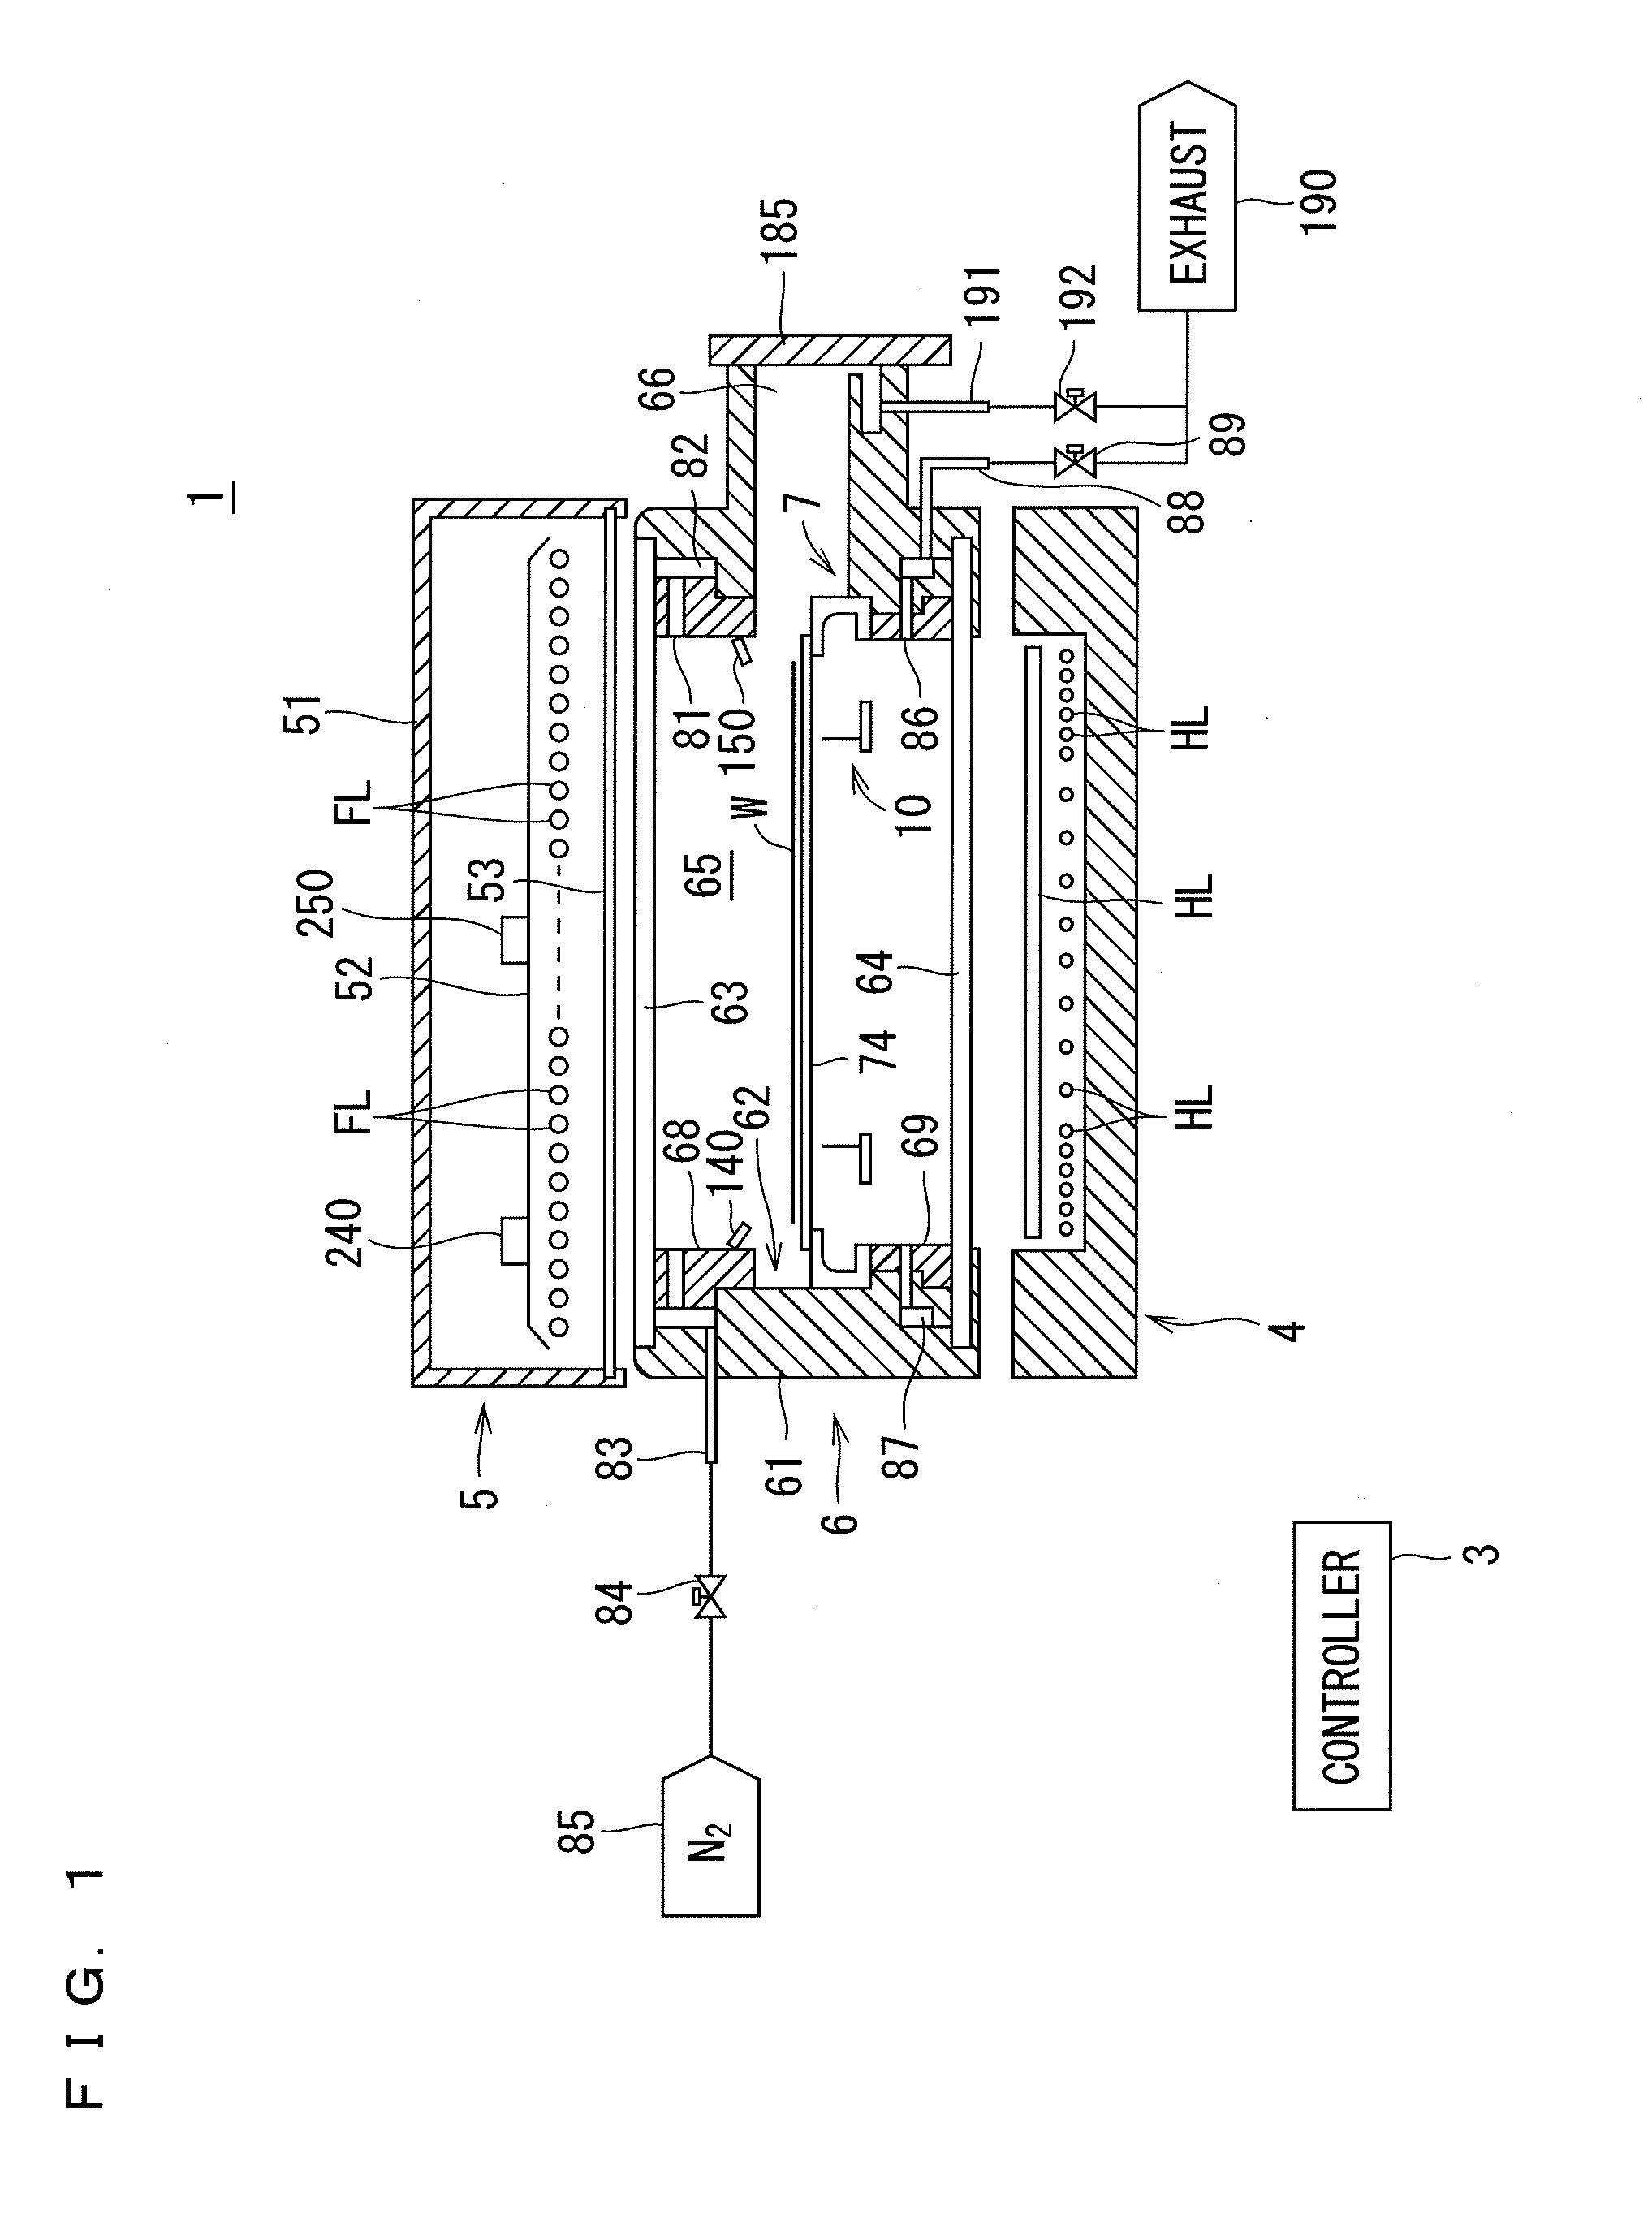 Heat treatment apparatus and heat treatment method for heating substrate by irradiating substrate with flash of light